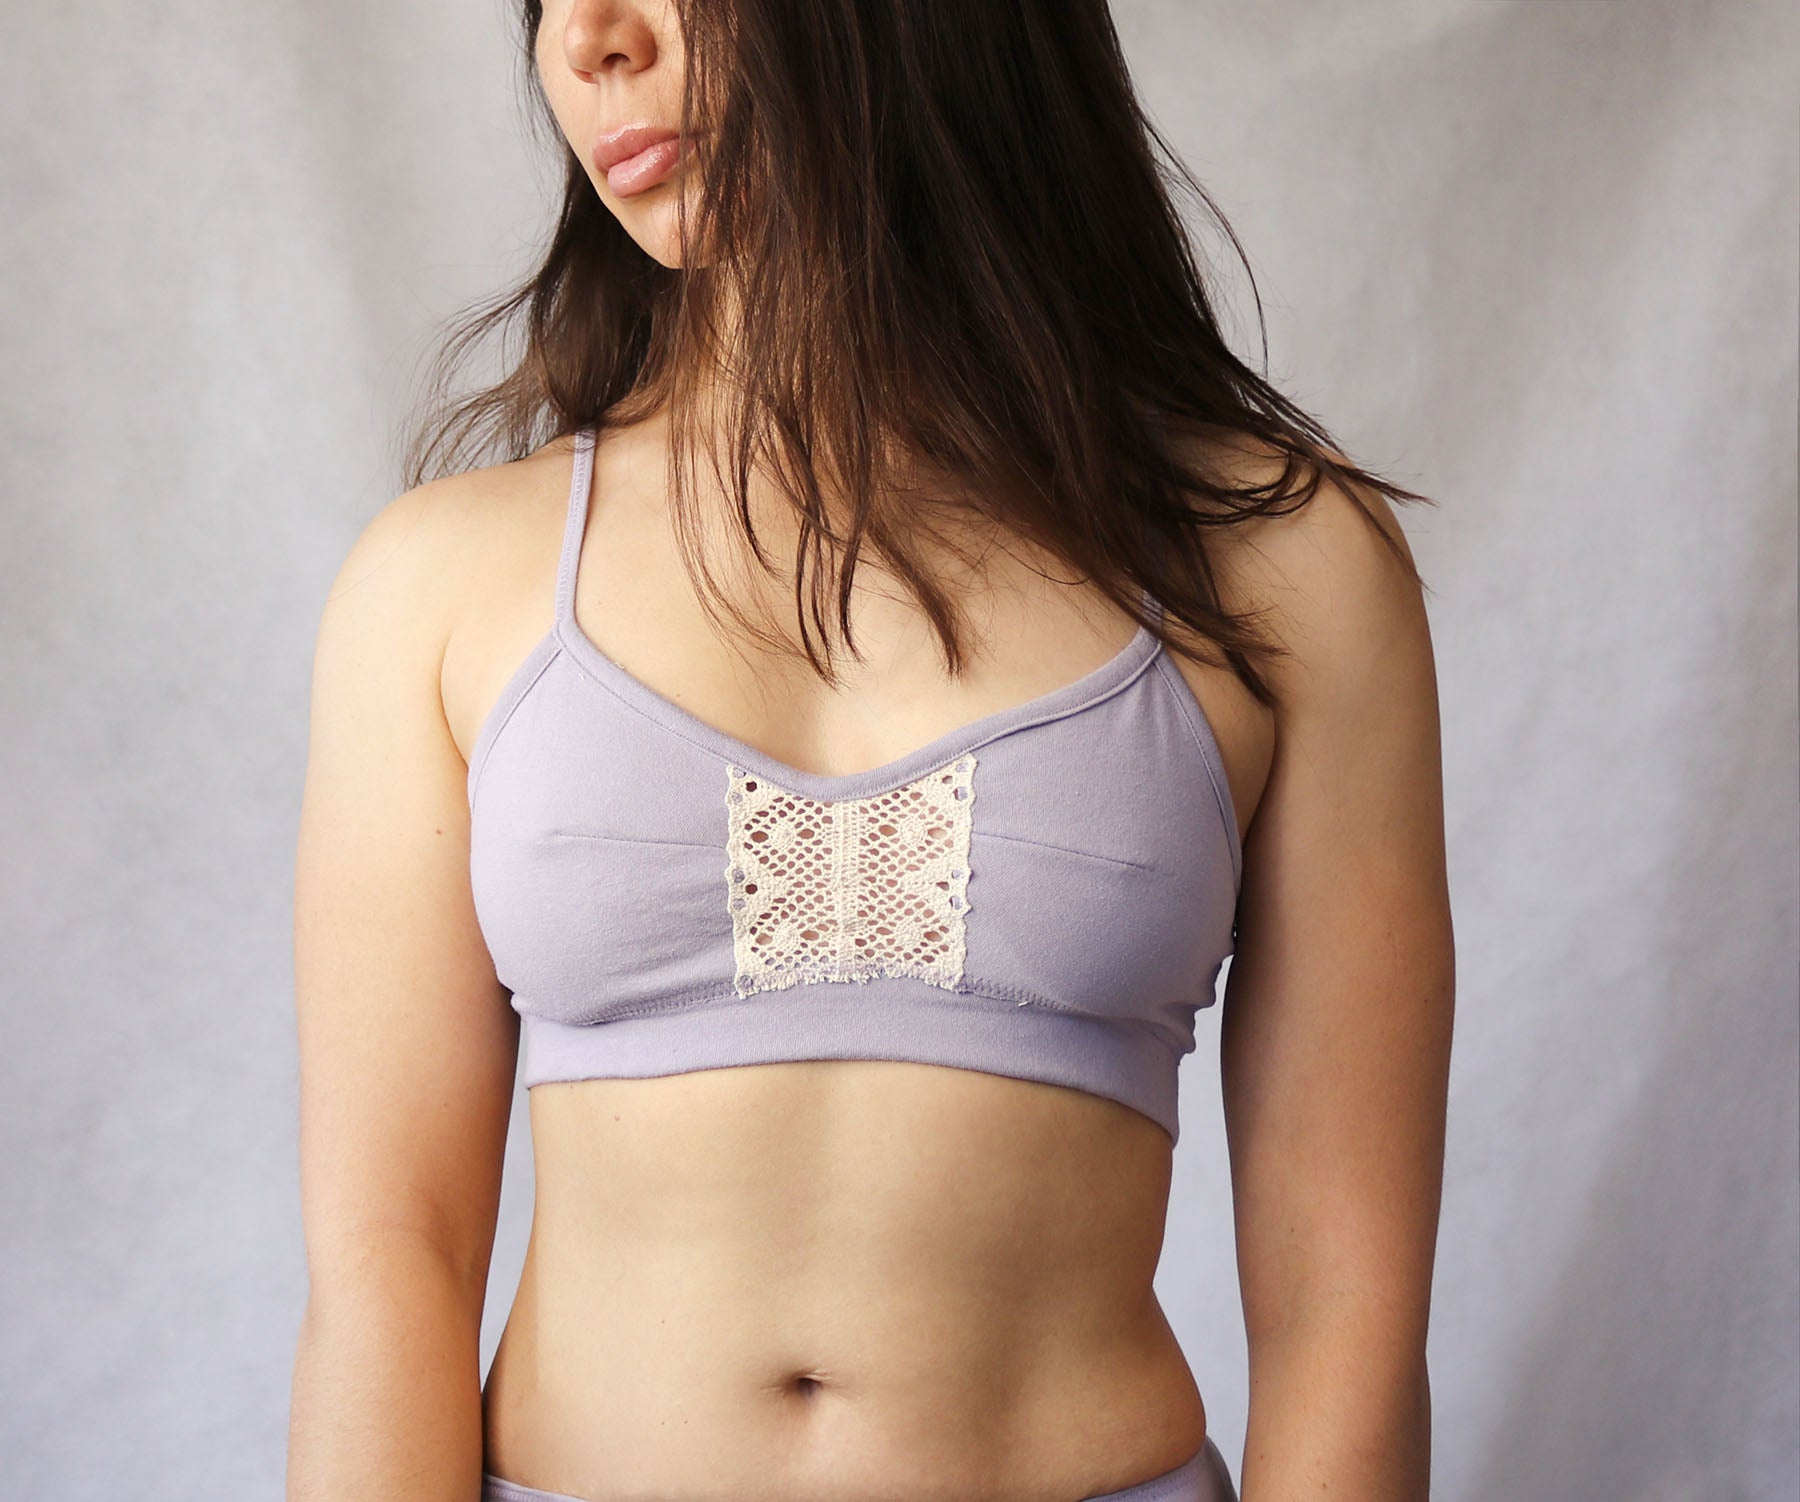 7 Organic Cotton Bralette Brands to Uplift Your Chest & The